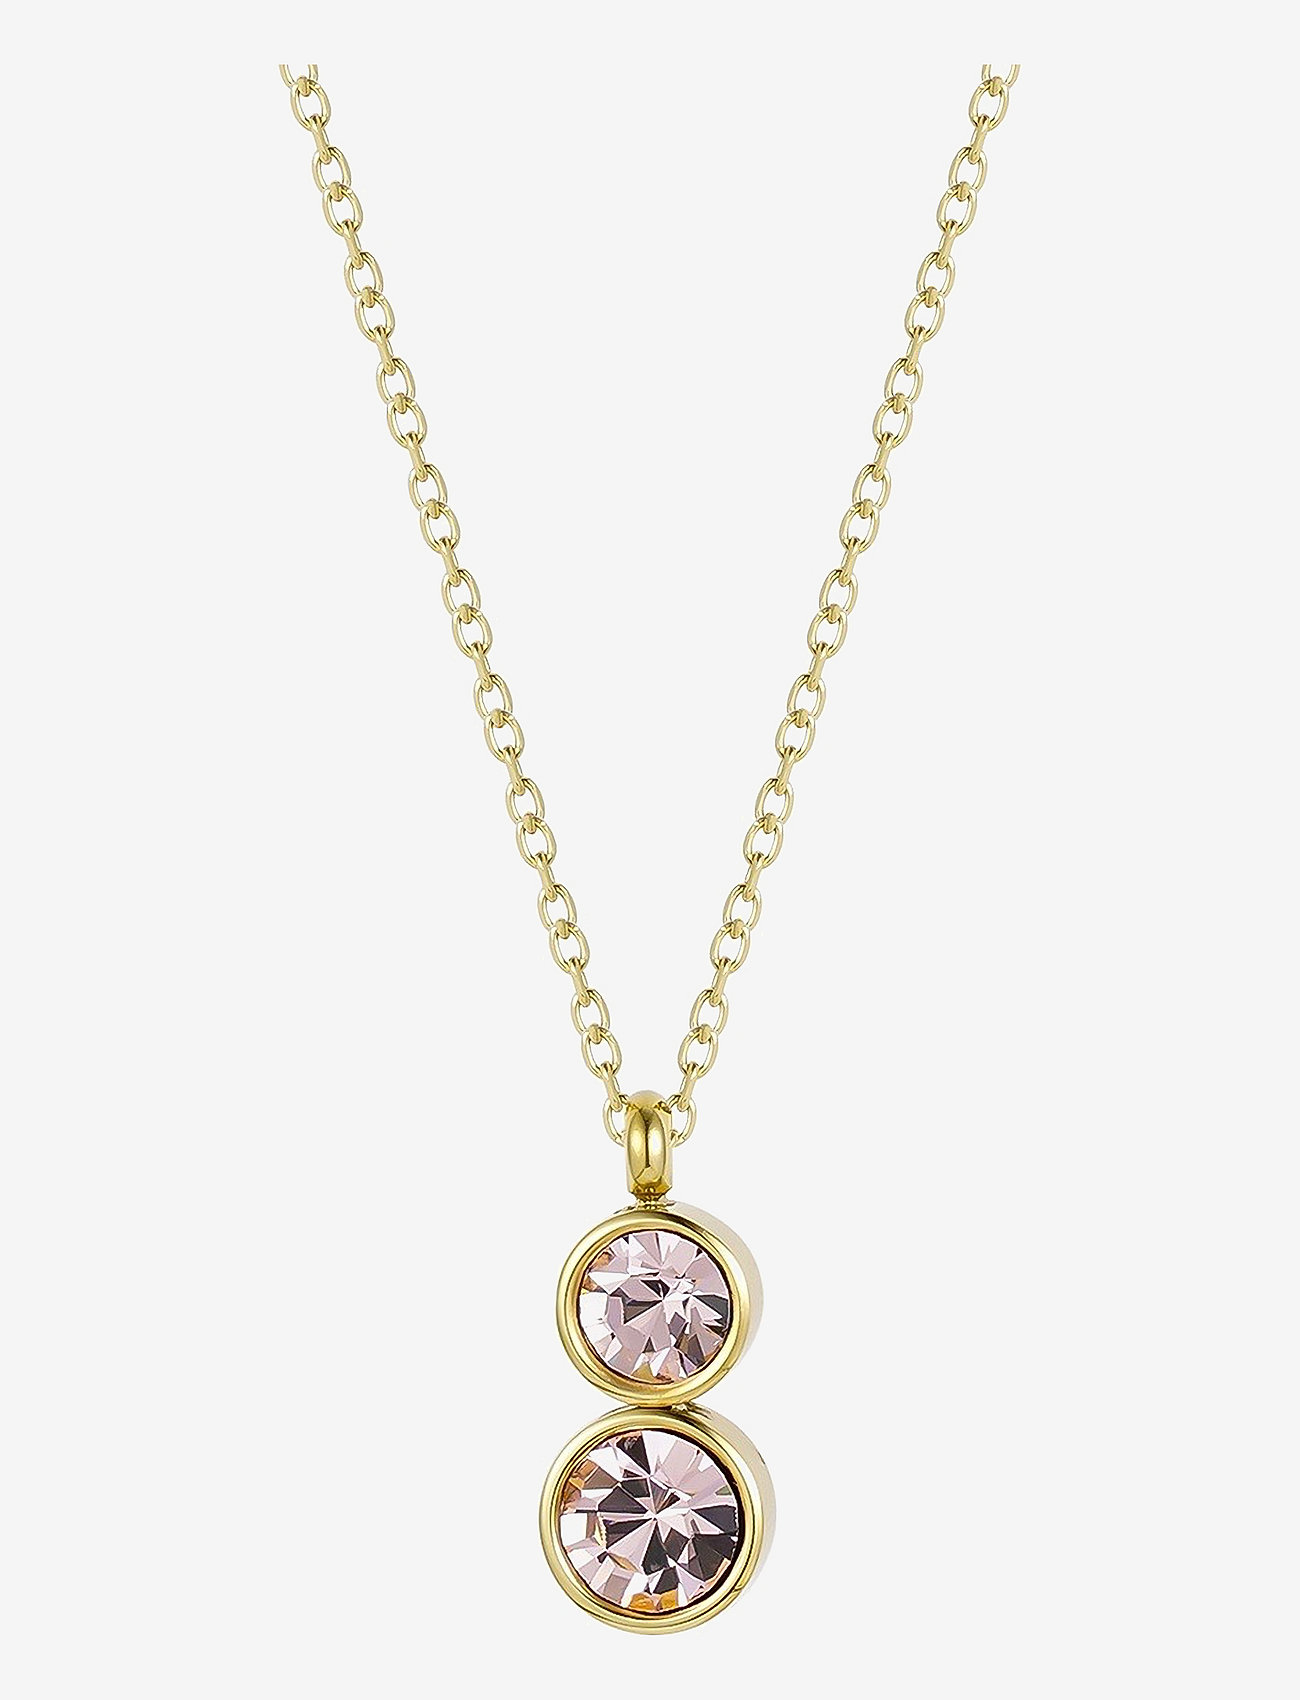 Bud to rose - Lima Duo Necklace Vintage Rose/Gold - gold - 0